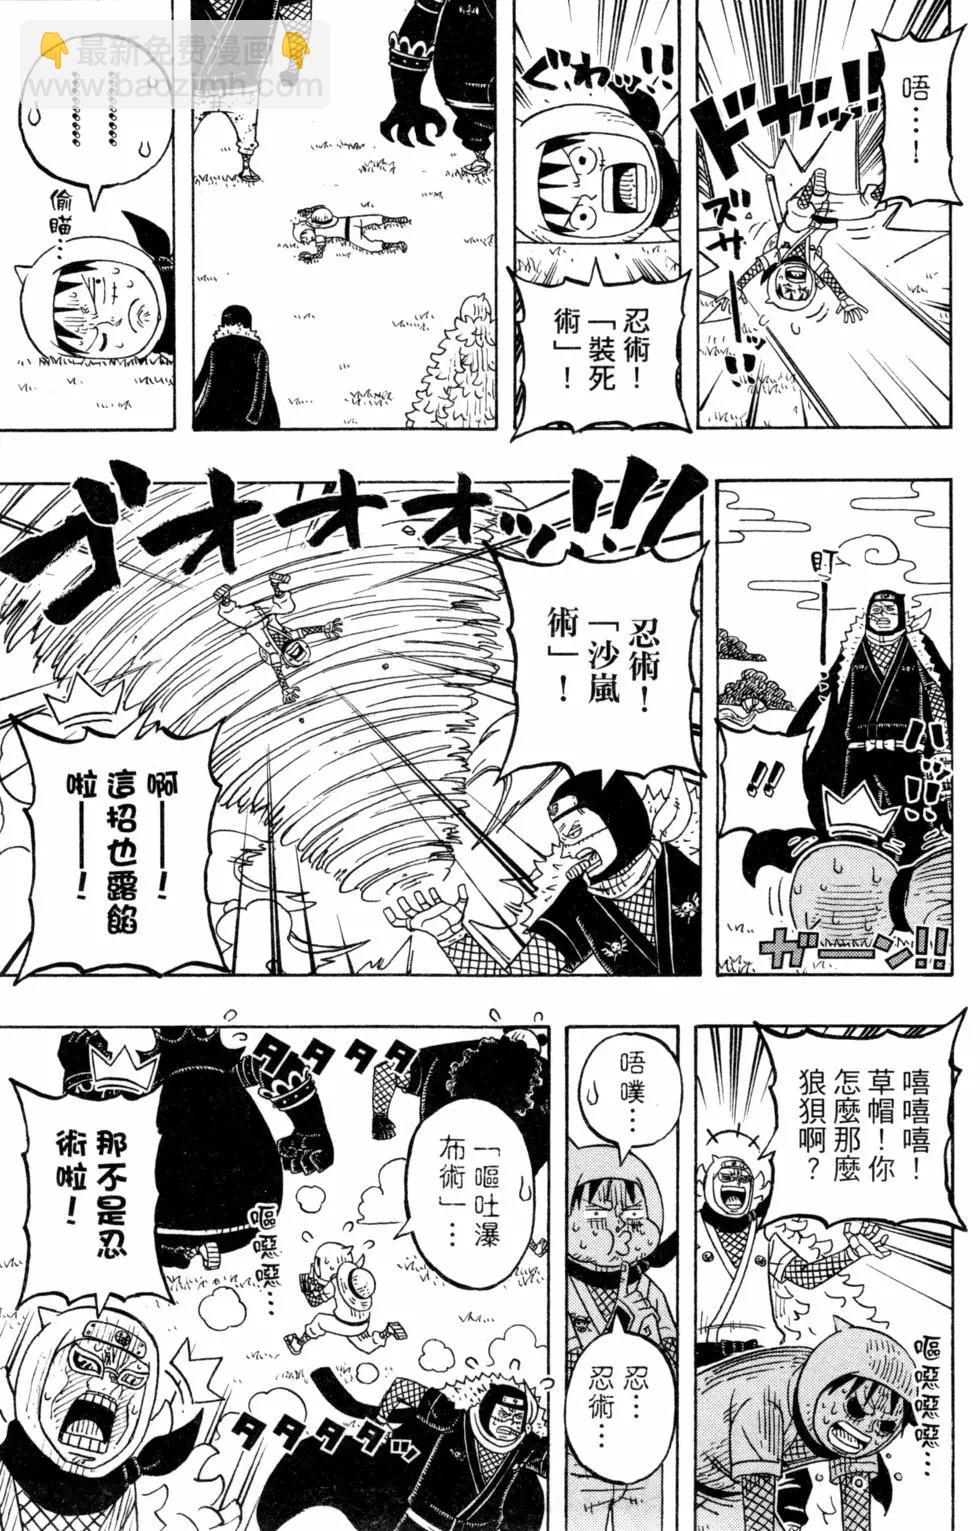 One piece party - 第06卷(1/4) - 8